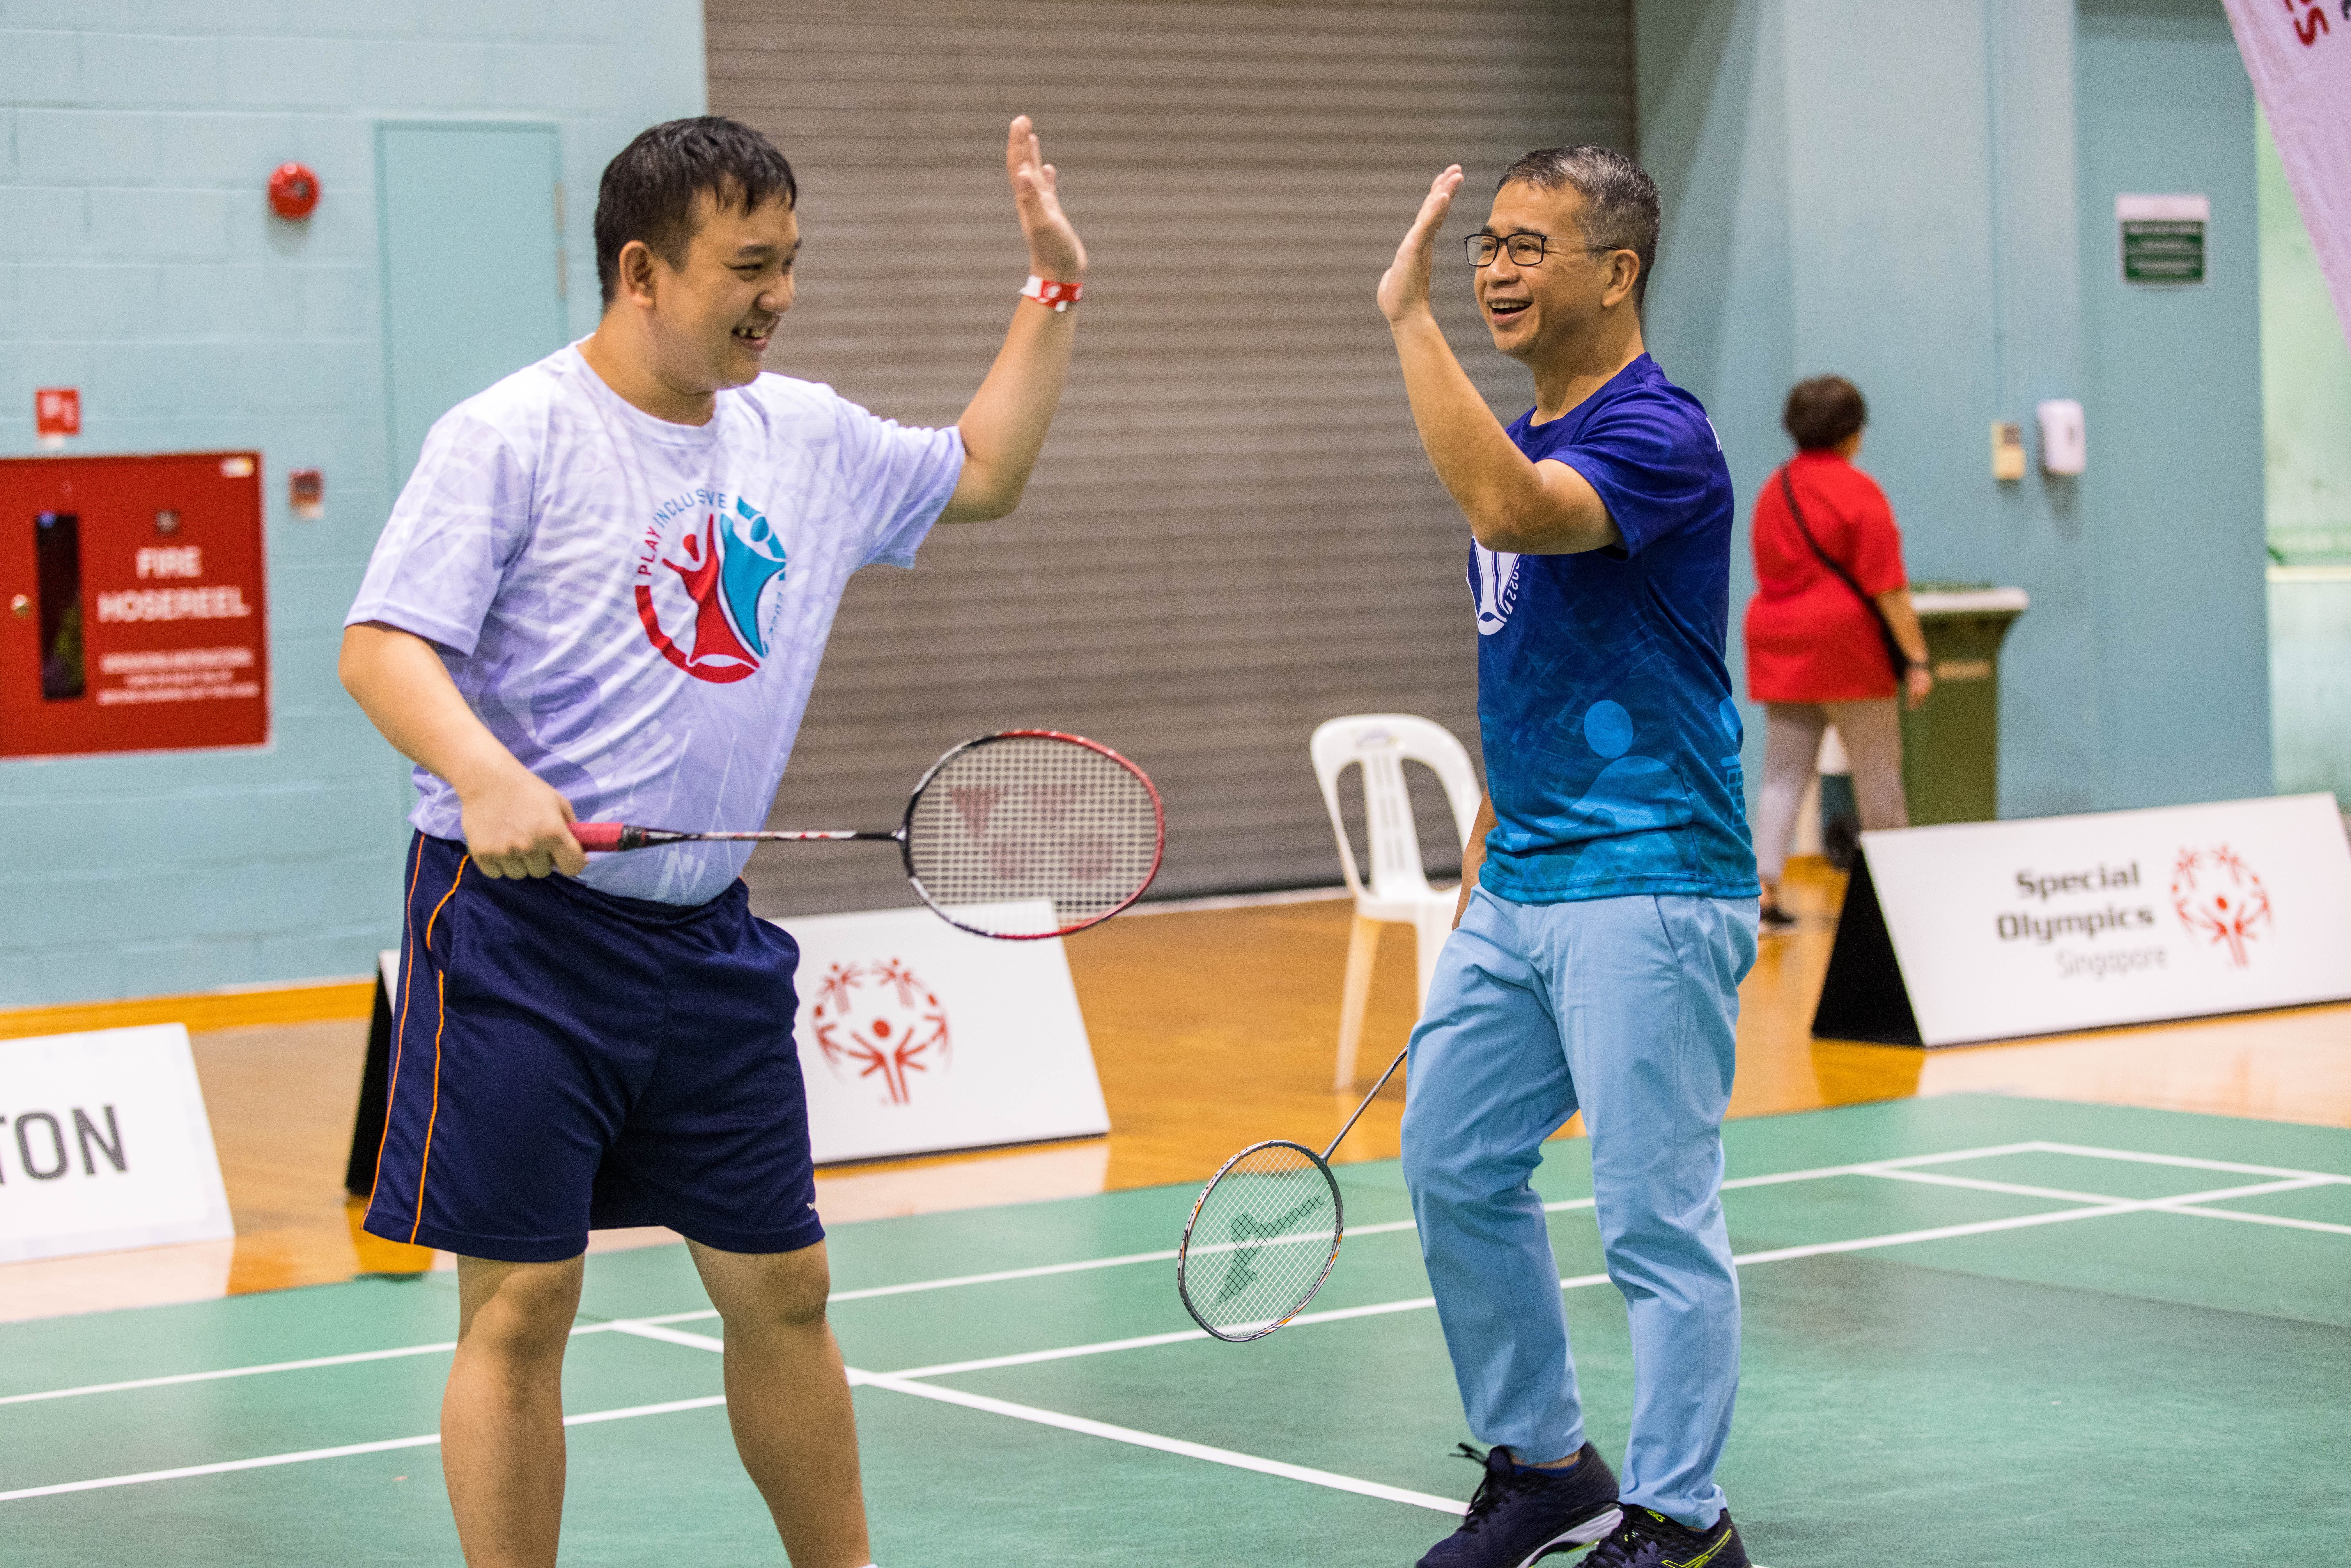 Min Edwin Tong with athlete Brenthan Tan from Special Olympics Singapore Outreach